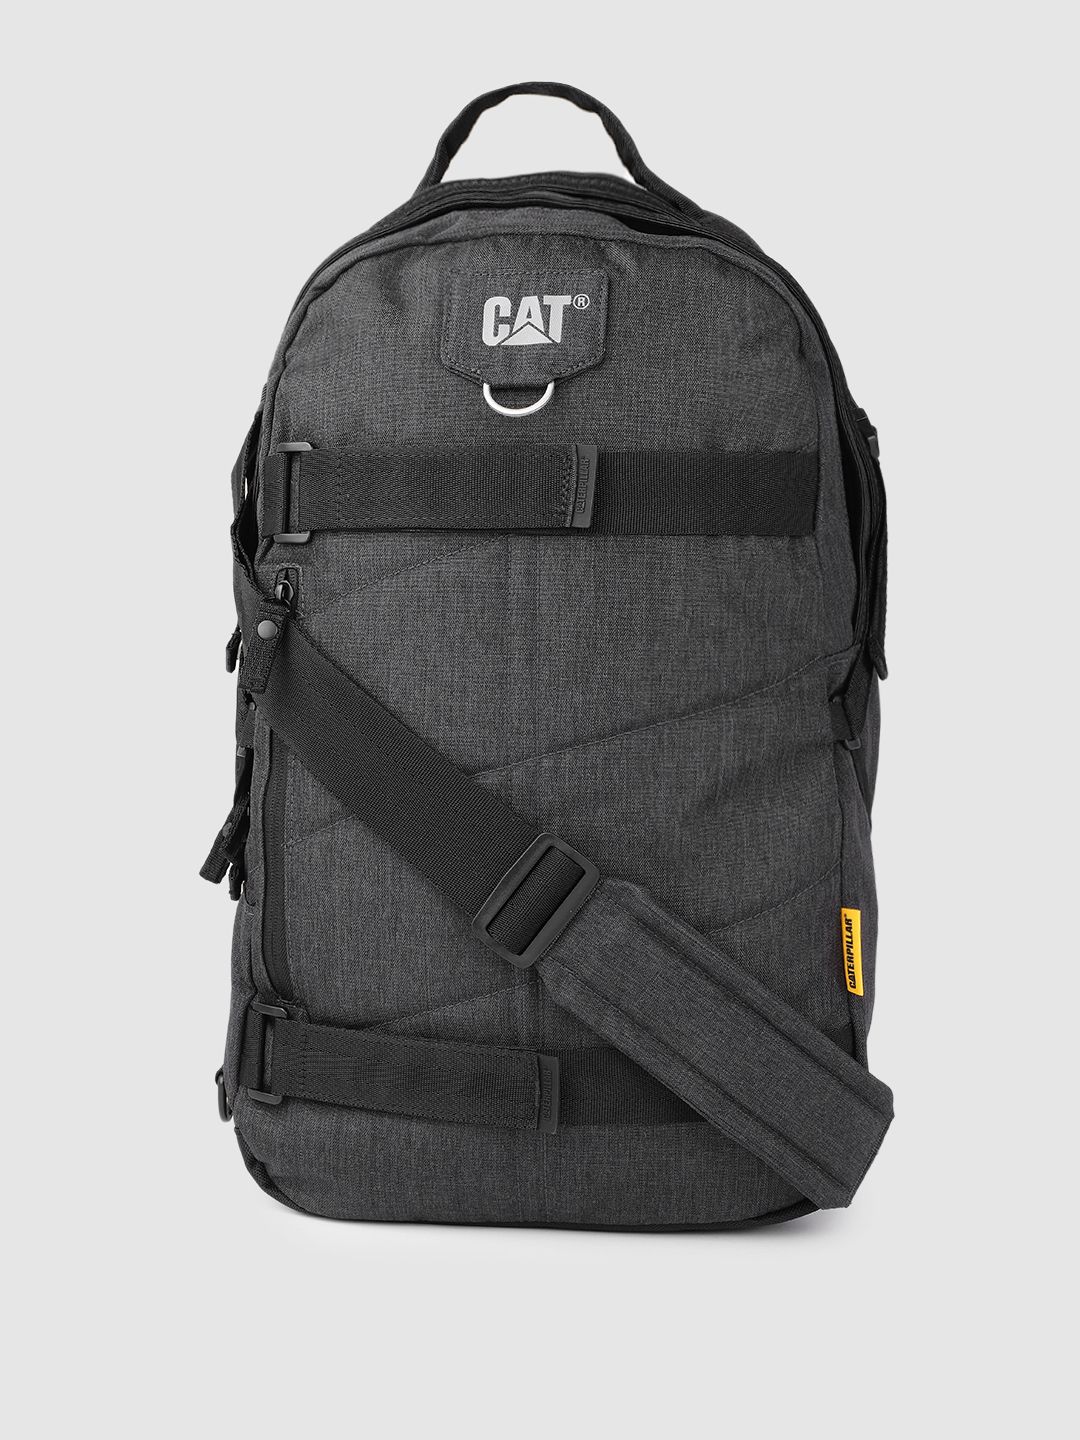 CAT Charcoal Backpack with Compression Straps Price in India